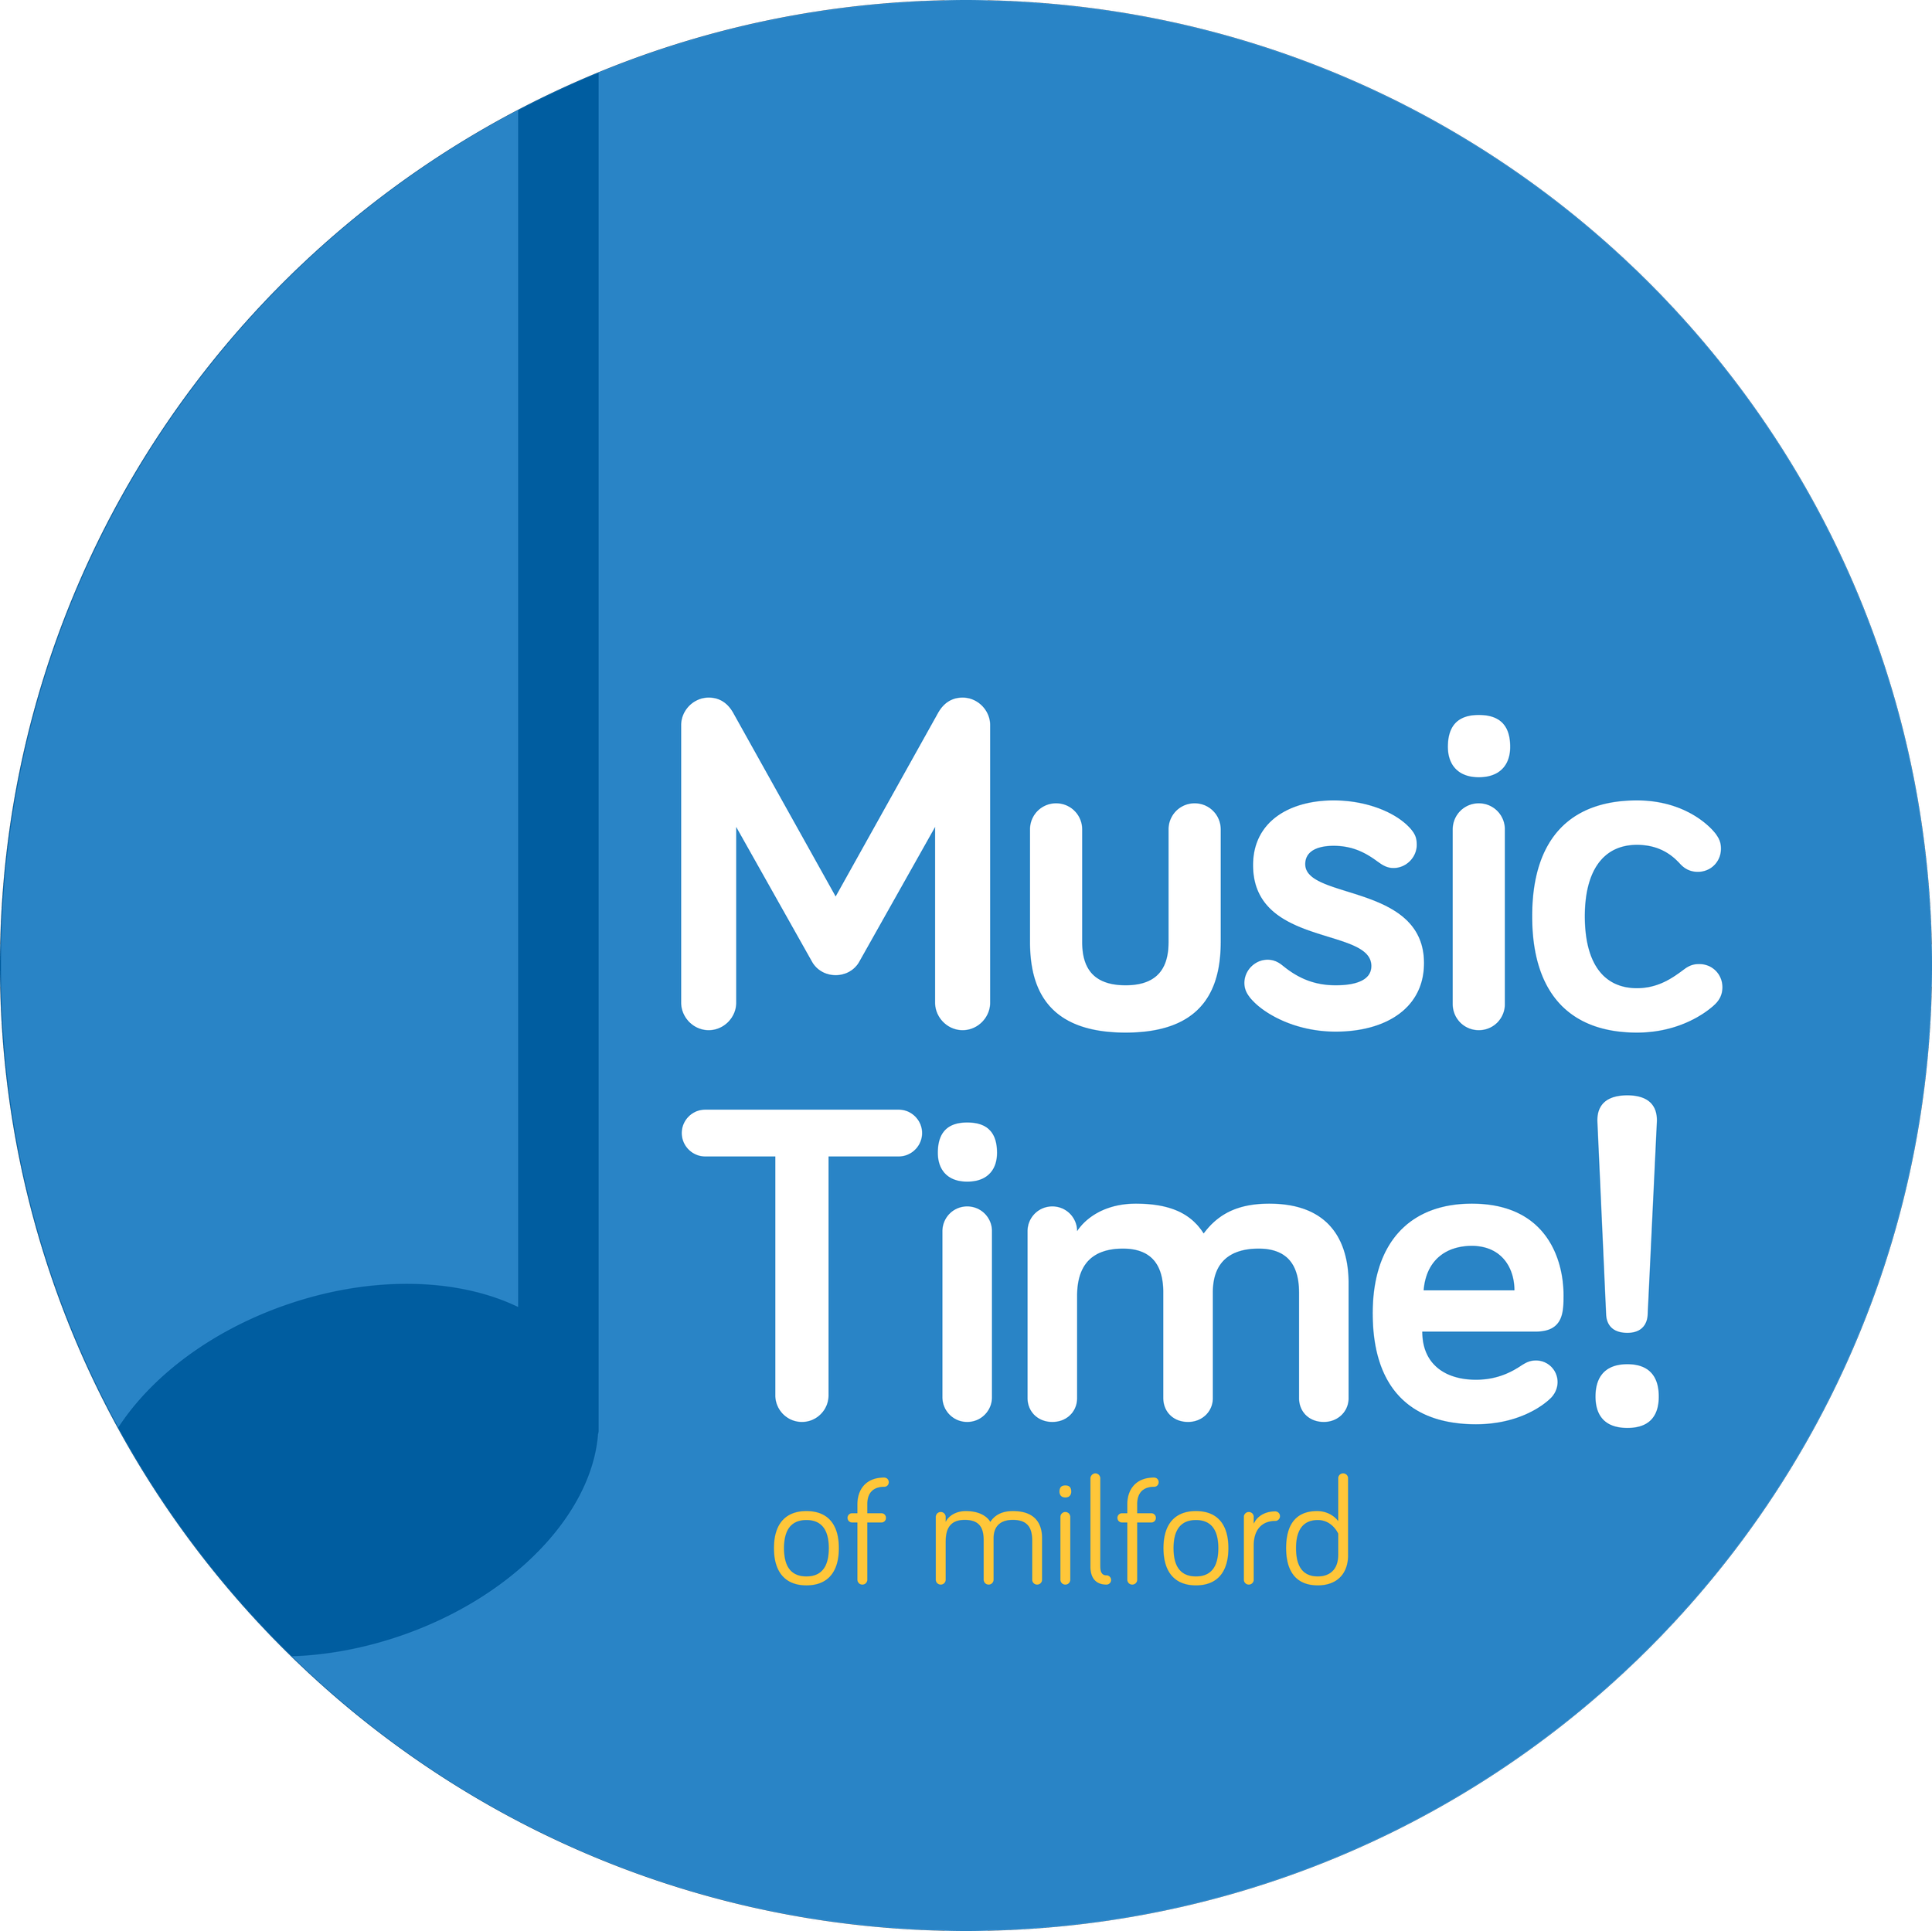 Music Time! of Milford